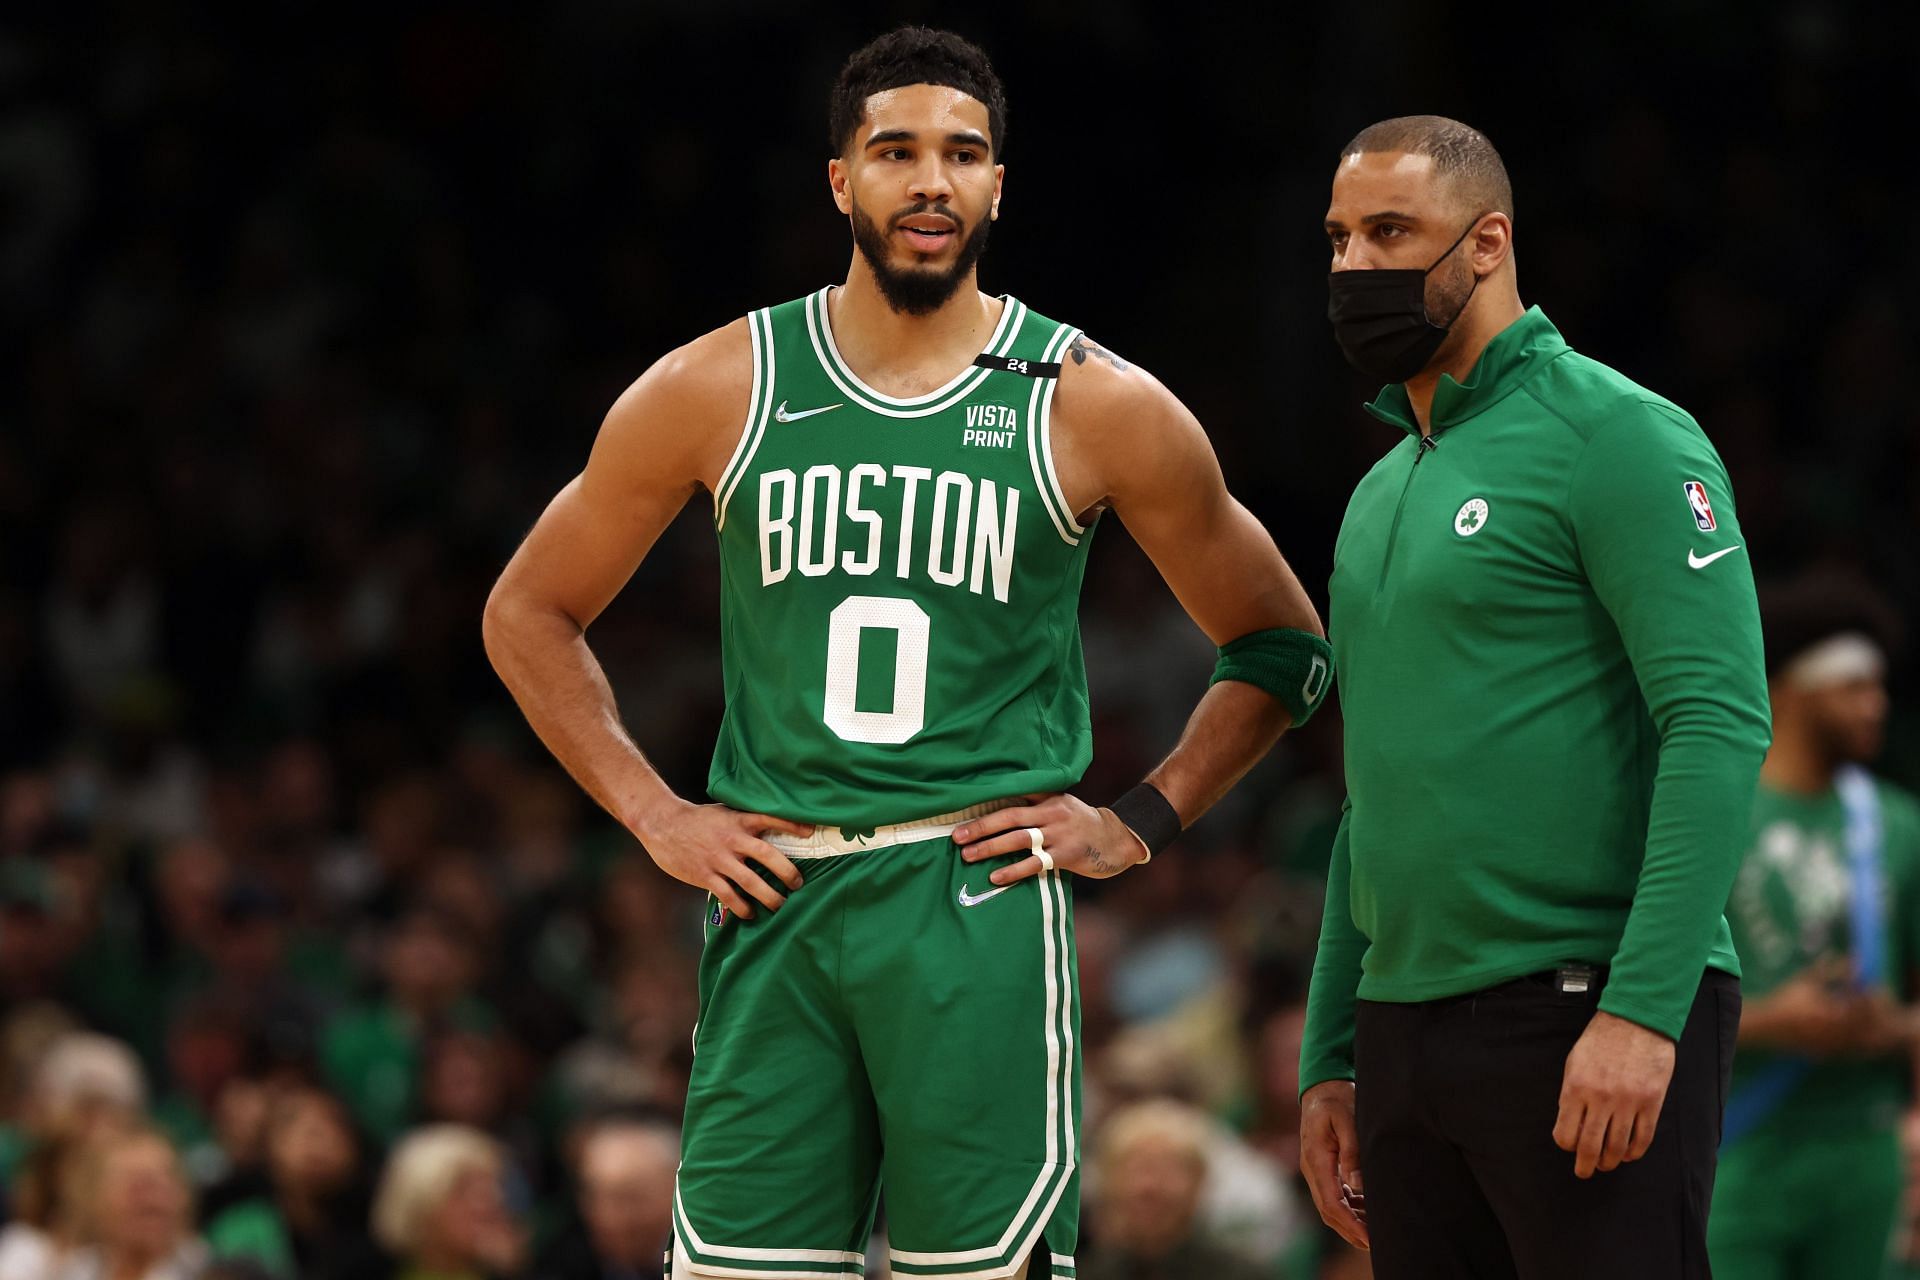 Boston Celtics head coach Ime Udoka talks with Jayson Tatum #0 during the first quarter of Game Two of the Eastern Conference Semifinals against the Milwaukee Bucks at TD Garden on May 03, 2022 in Boston, Massachusetts.